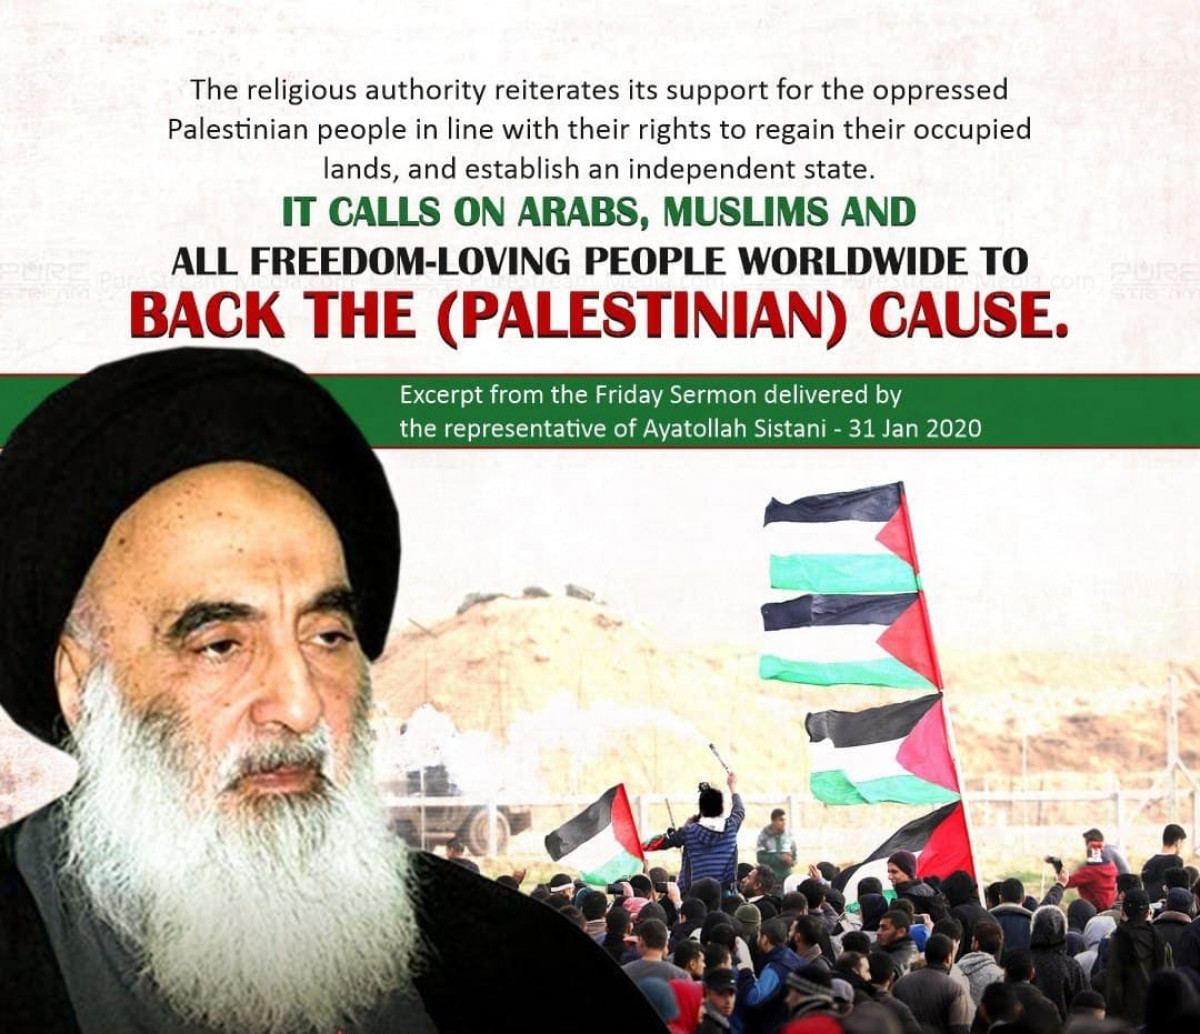 It calls on Arabs, Muslims and all freedom-loving people worldwide to back the (Palestinian) cause